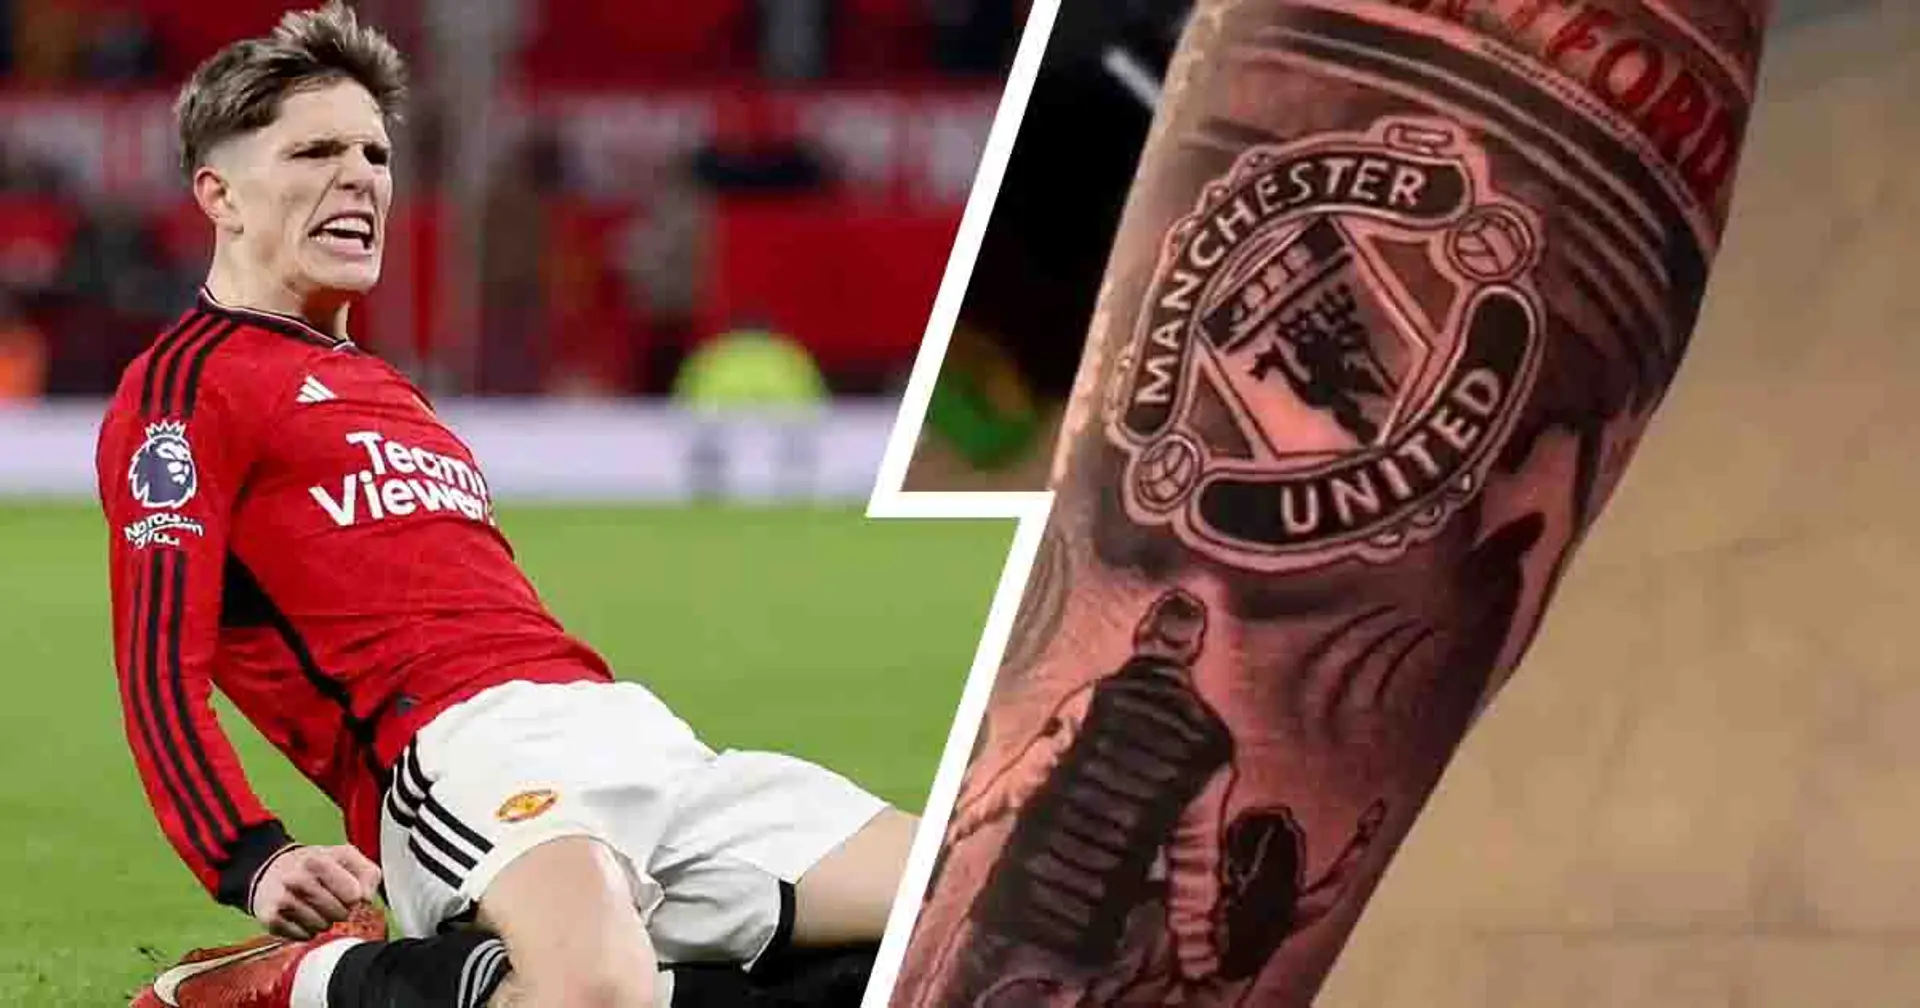 Two best pics as Garnacho pays ultimate homage to Man United with new arm tattoos